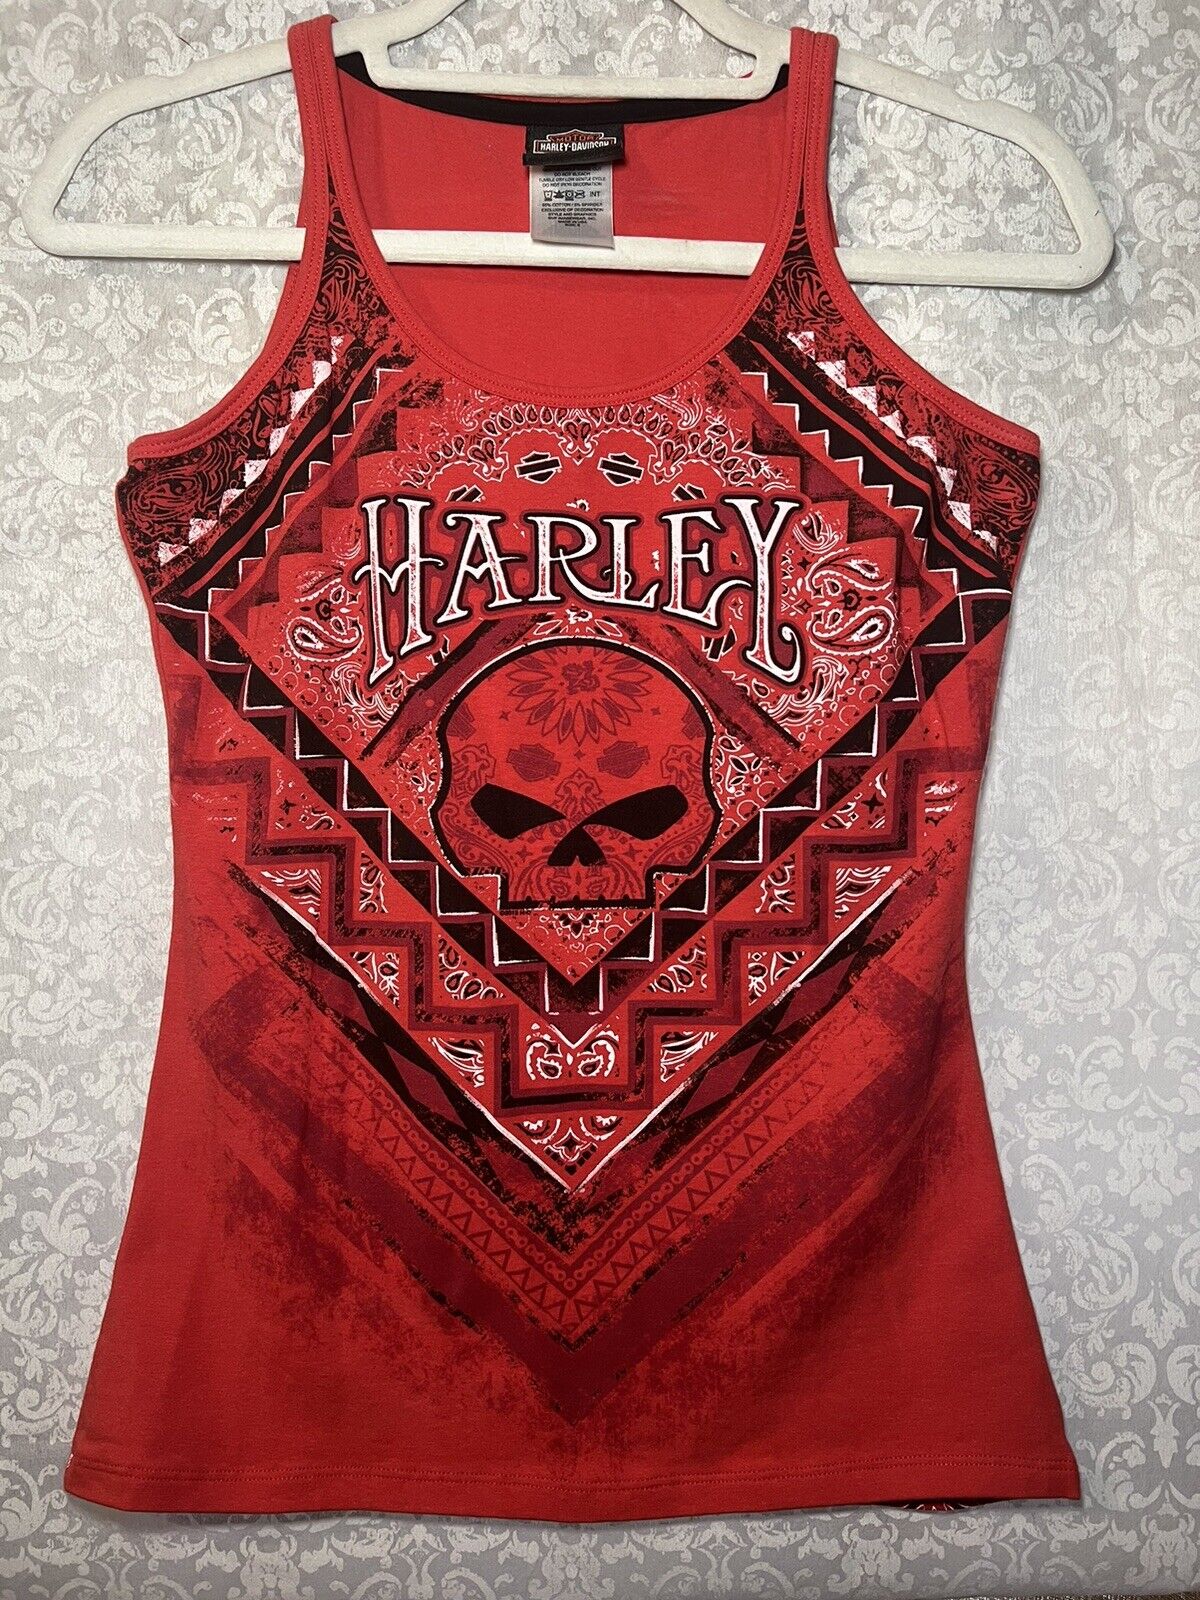 Woman’s Harley Davidson Orange and Black Skull Tank Style Top from Down Home HD